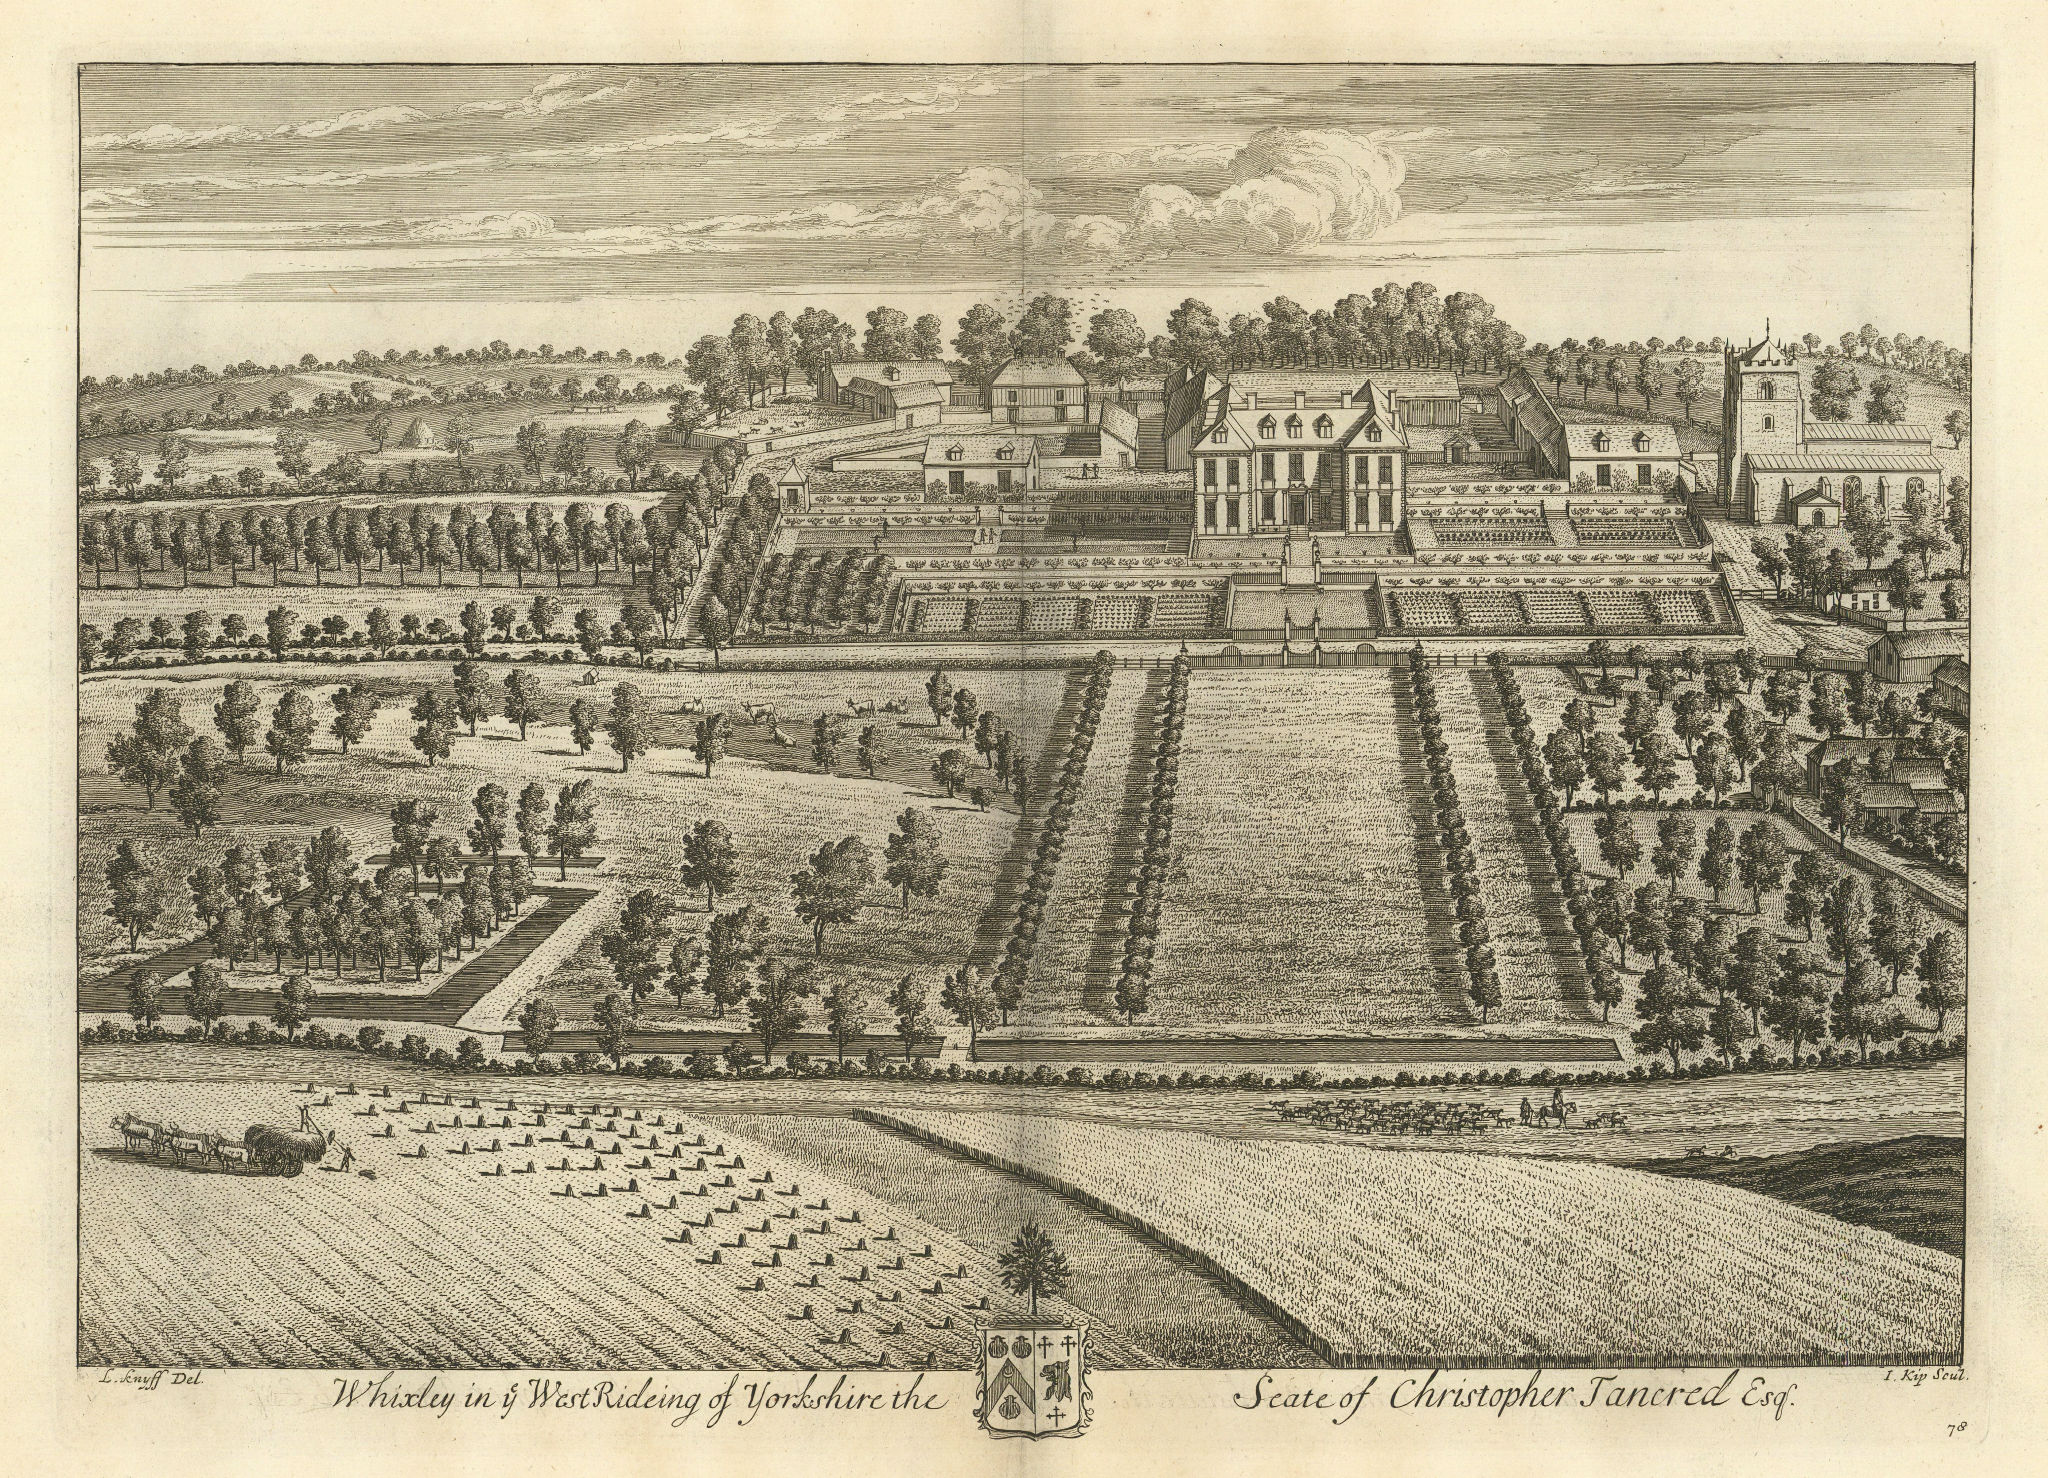 Whixley Hall by Kip & Knyff. "Whixley in ye West Rideing of Yorkshire" 1709